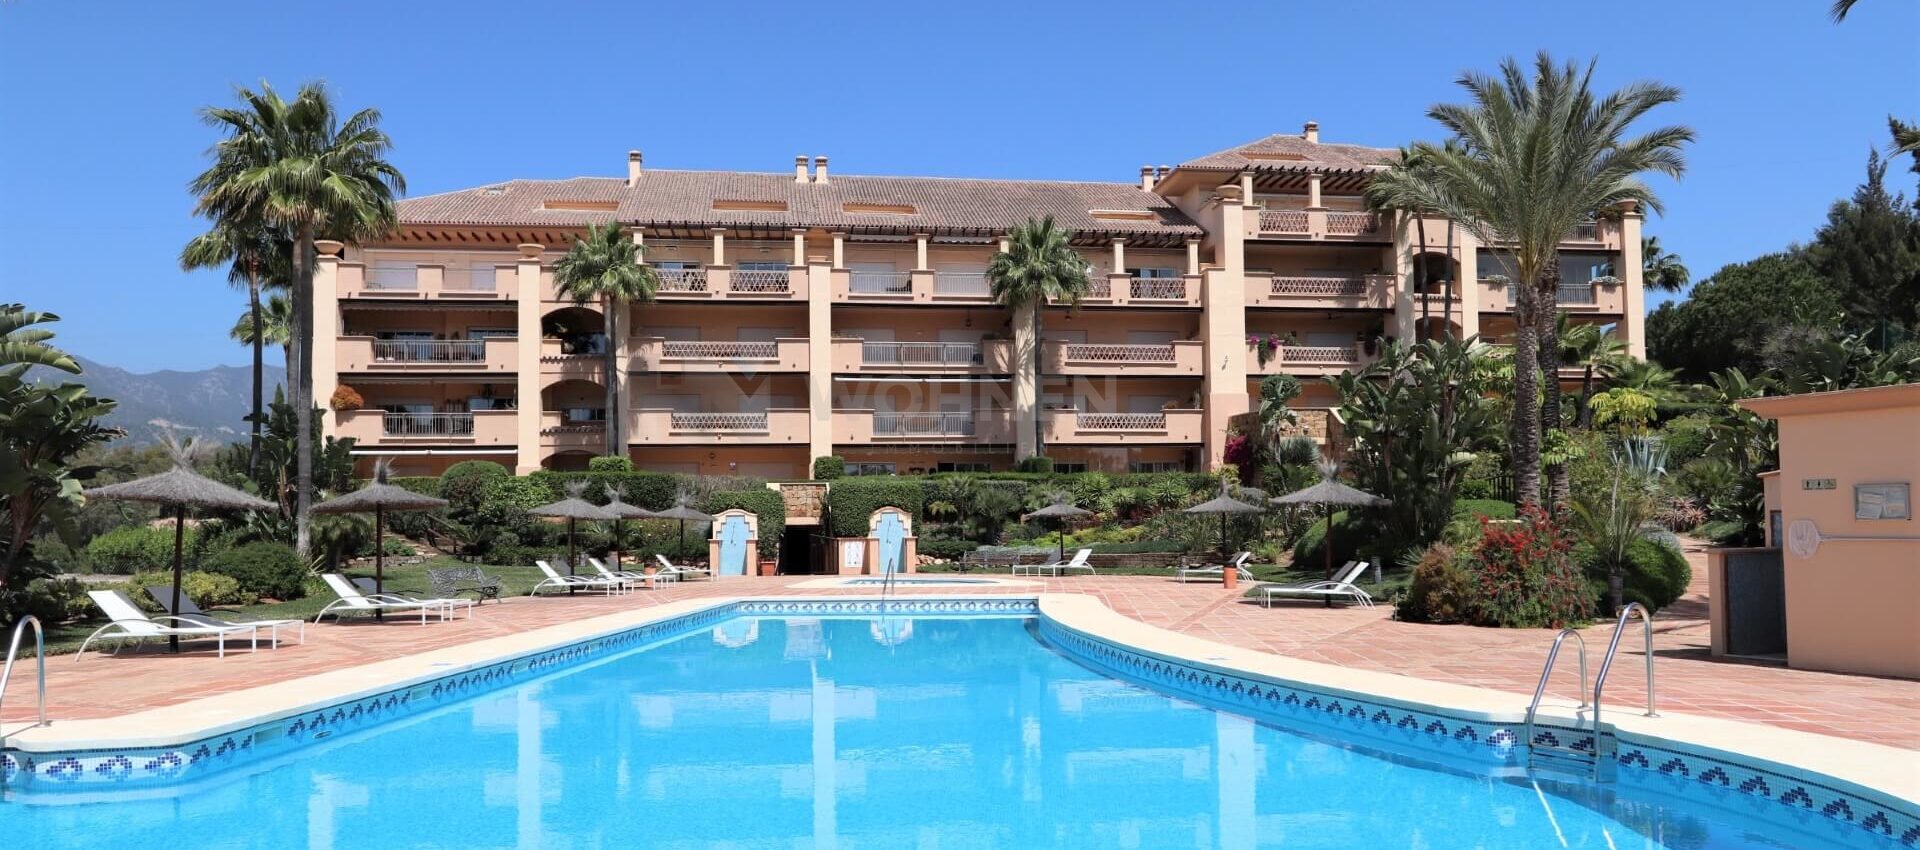 Charming apartment with stunning sea views in Los Monteros Rio Real